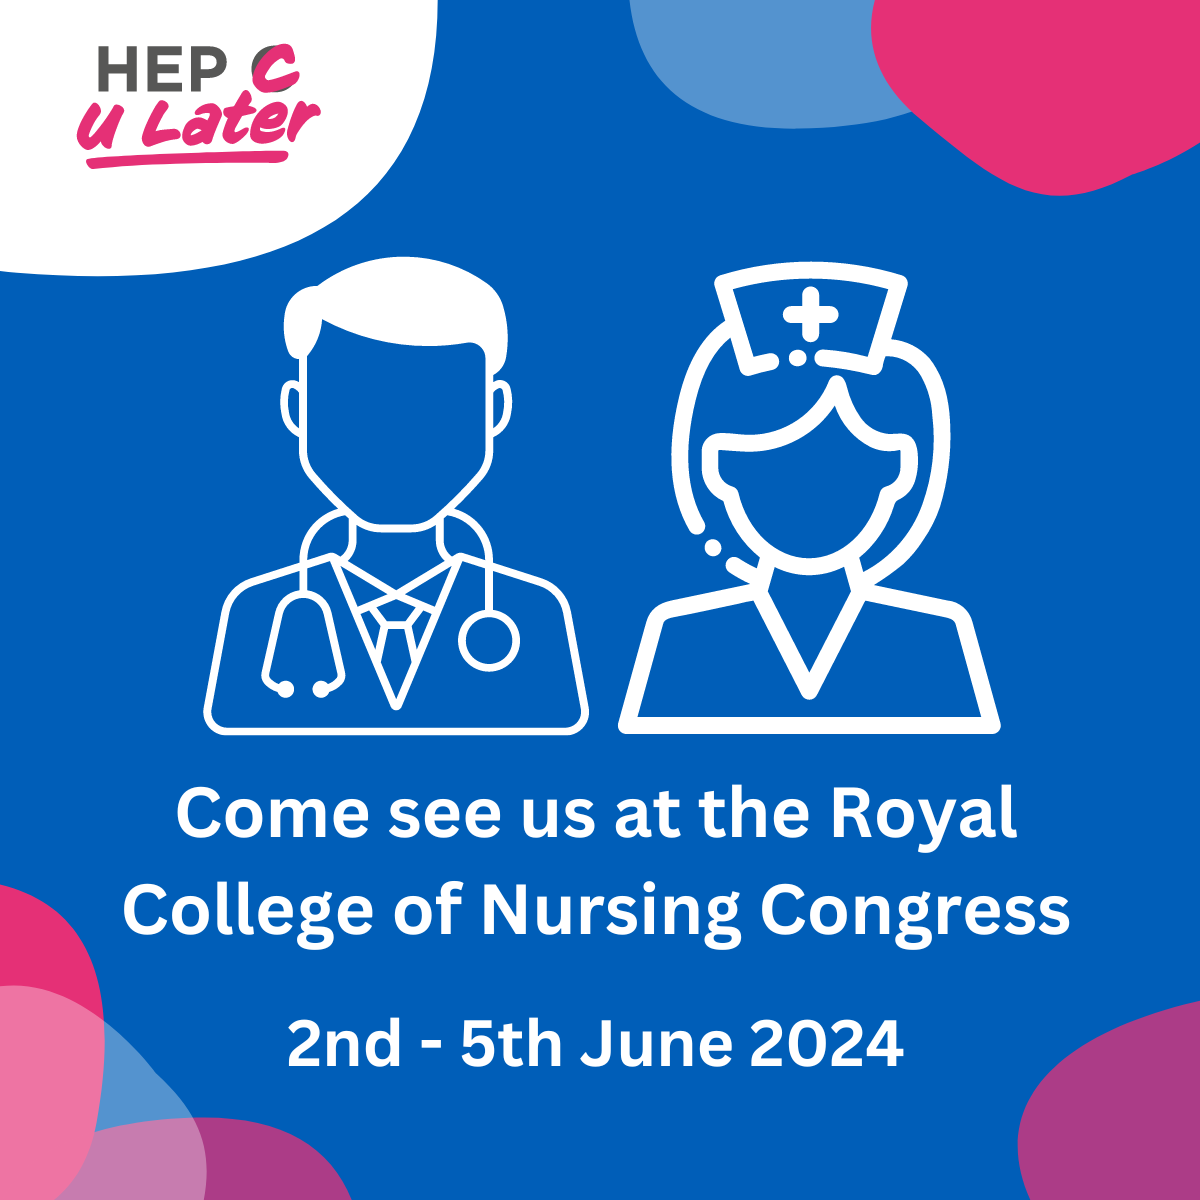 We are excited to announce that we will be attending the Royal College of Nursing Congress at the ICC Wales in Newport from June 2nd to June 5th. Please visit us at stand CH7 where we would love to discuss all things related to hepatitis C and share our resources with you.